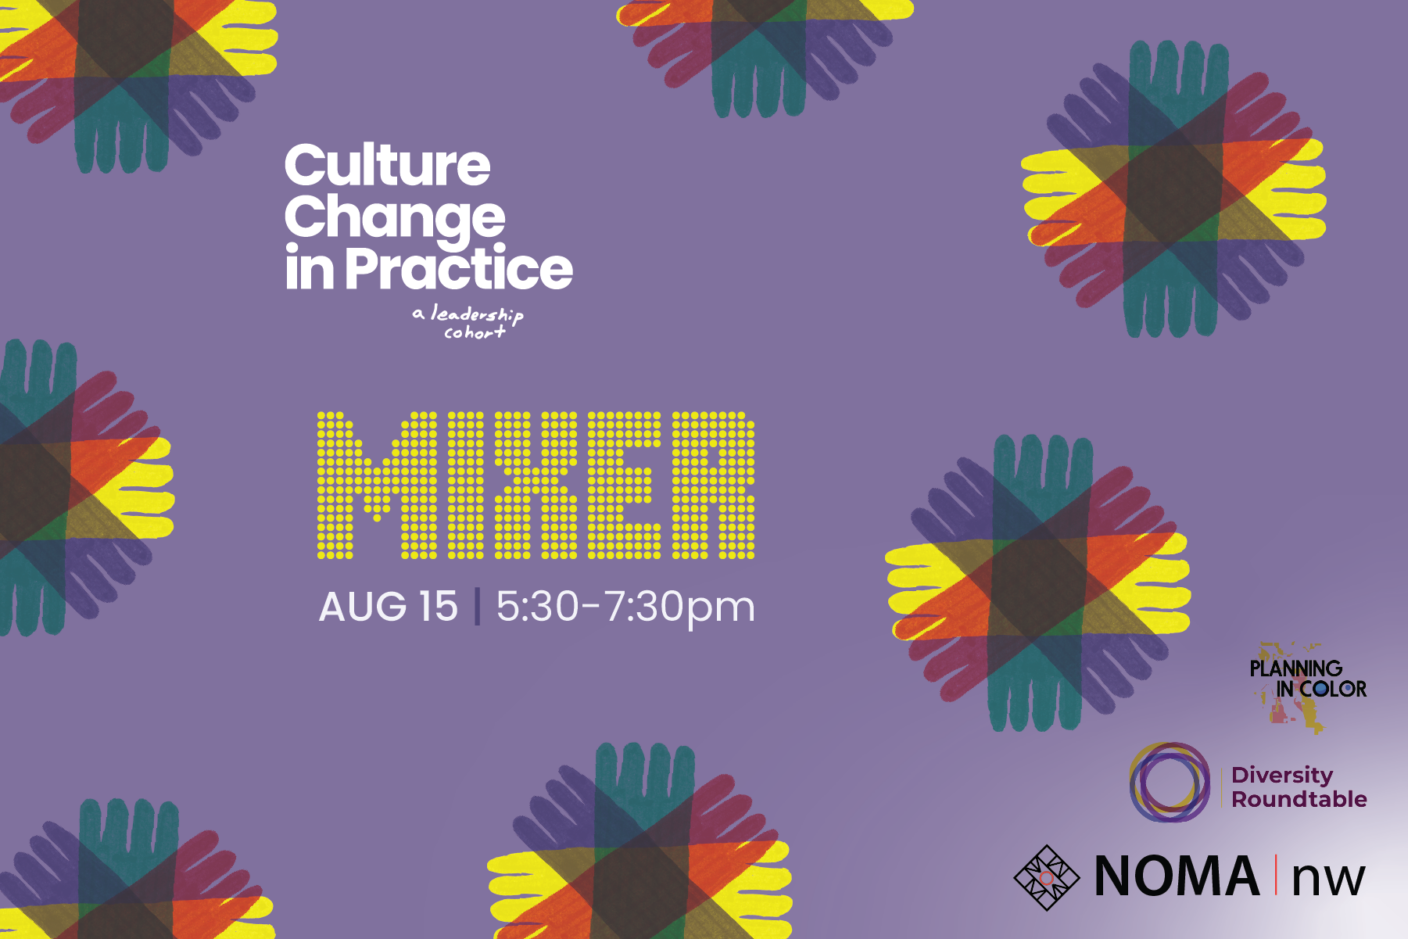 The Racial Justice Working Group is pleased to host the first Culture Change in Practice Mixer on Tuesday, August 15, 5:30-7:30pm at The Miller Hull Partnership! We invite past Culture Change cohort participants and prospective Culture Change cohort participants to join us for an evening of connection, reflection, and change-making. 